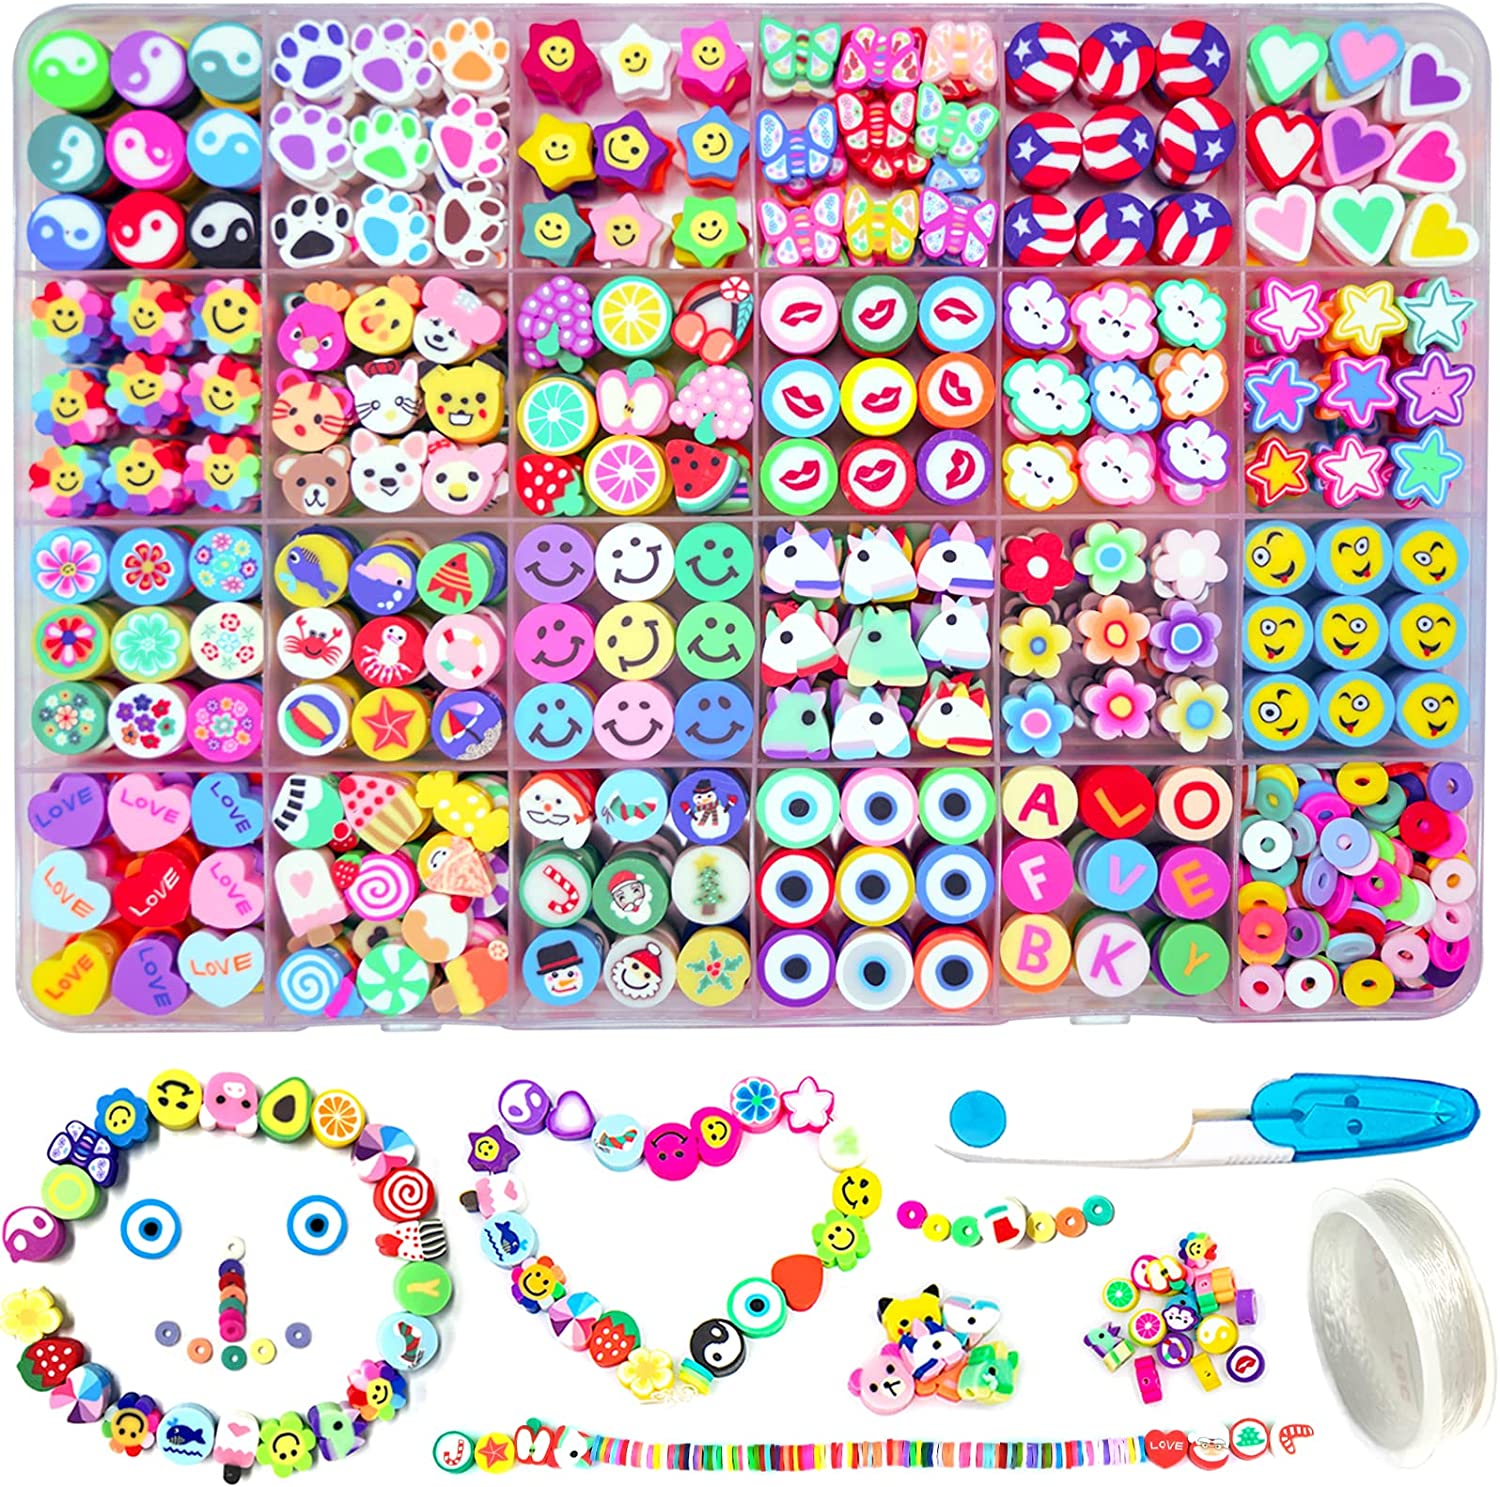 666PCS Flower Smiley Polymer Clay Beads Charms 24 Styles Cool Fun